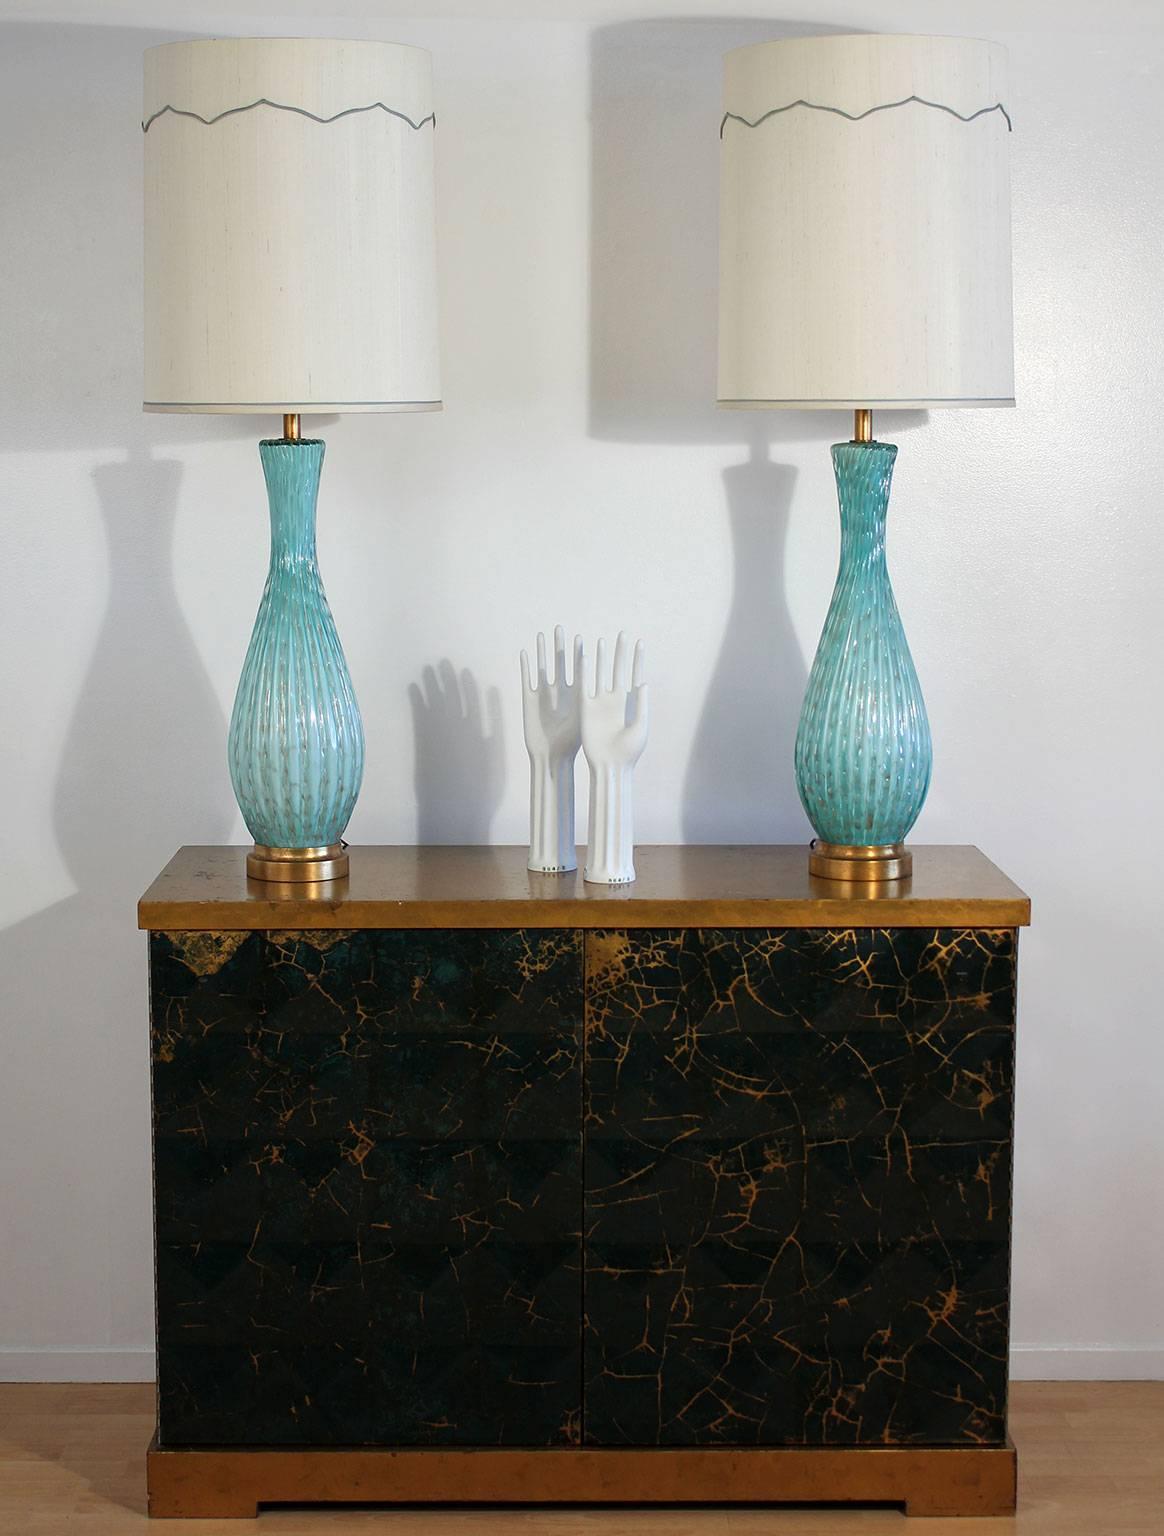 Beautifully preserved pair of tall Murano light blue art glass table lamps with controlled bubbles and gold inclusions. Original custom shades. Excellent all original condition, circa 1950s, Italy.

Overall dimensions with shades: 47